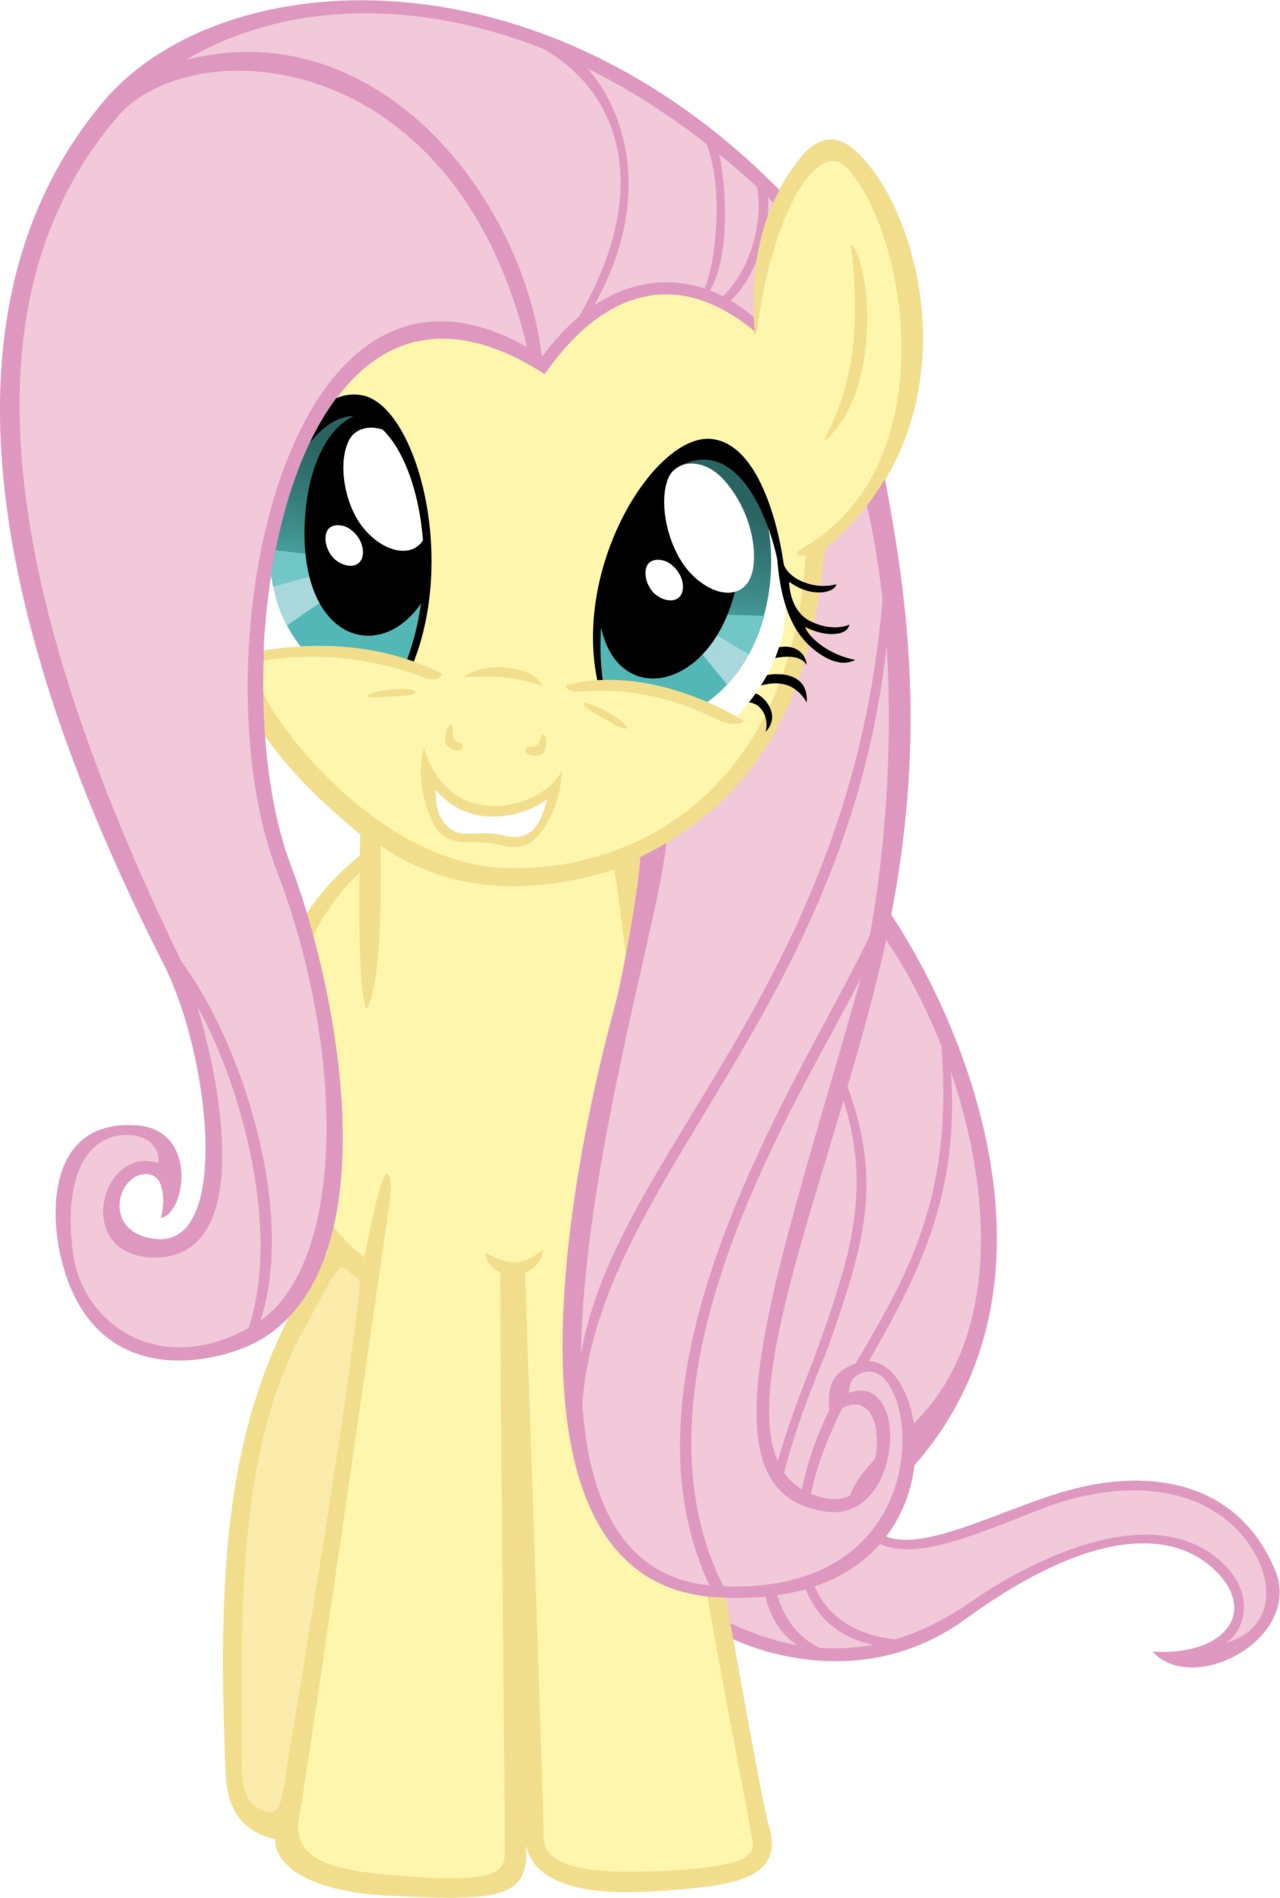 fluttershy_is_happy_by_moongazeponies-d3gwbj1.png